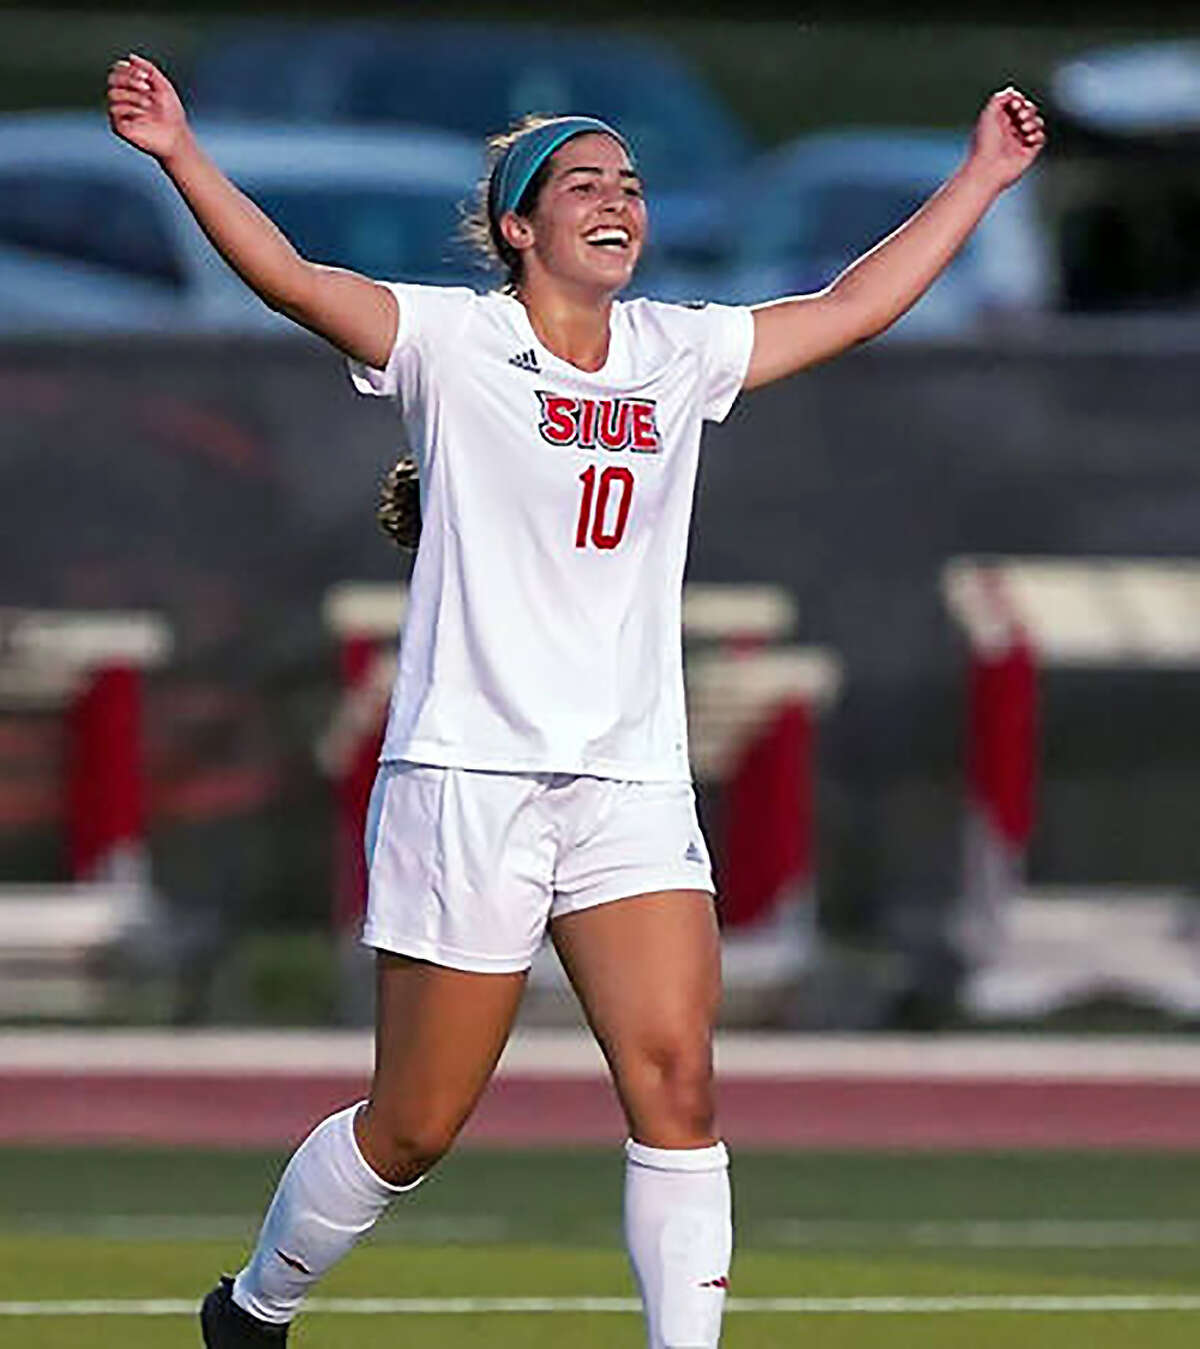 SIUE's Maria Haro has scored in three of the Cougars' four spring games. She is shown celebrating a goal against SIU Carbondale last season.